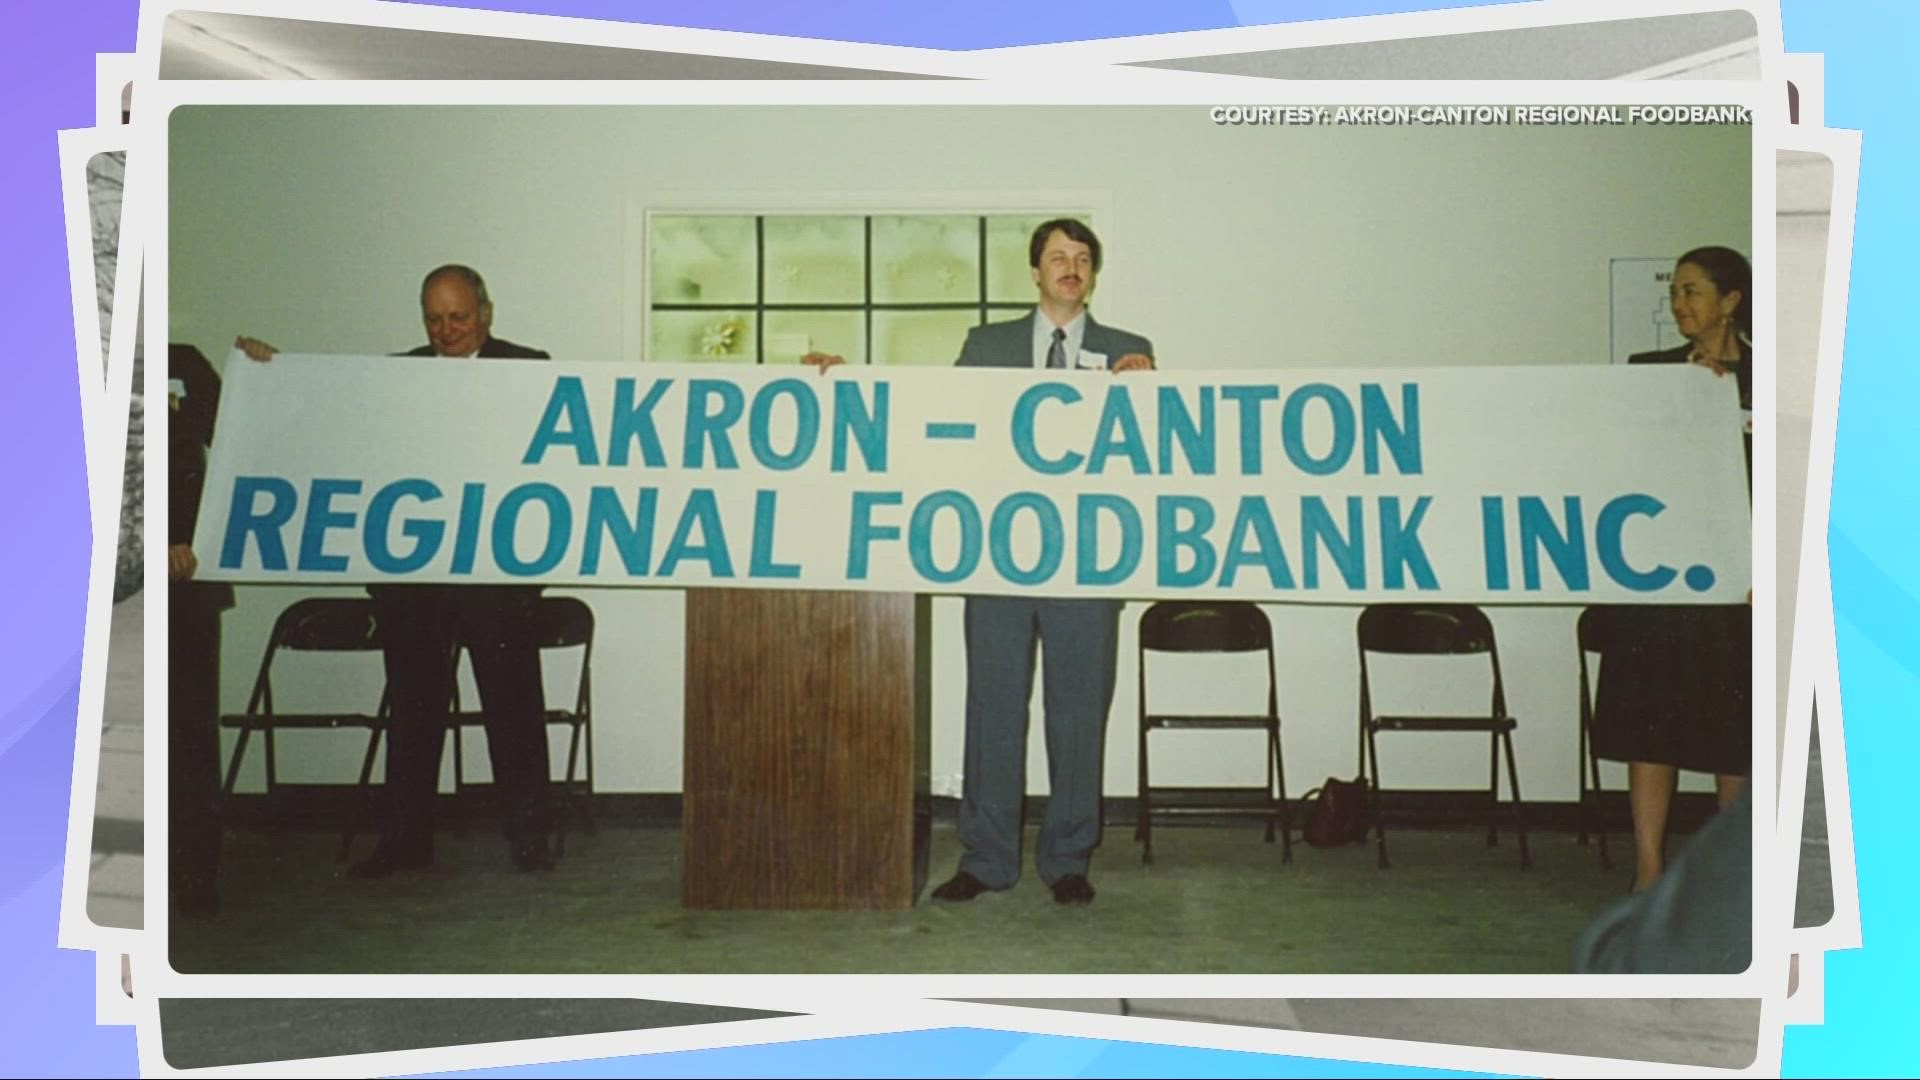 Giving food to these in need, an act of kindness that has been happening for 40 years at Akron-Canton Regional Foodbank.